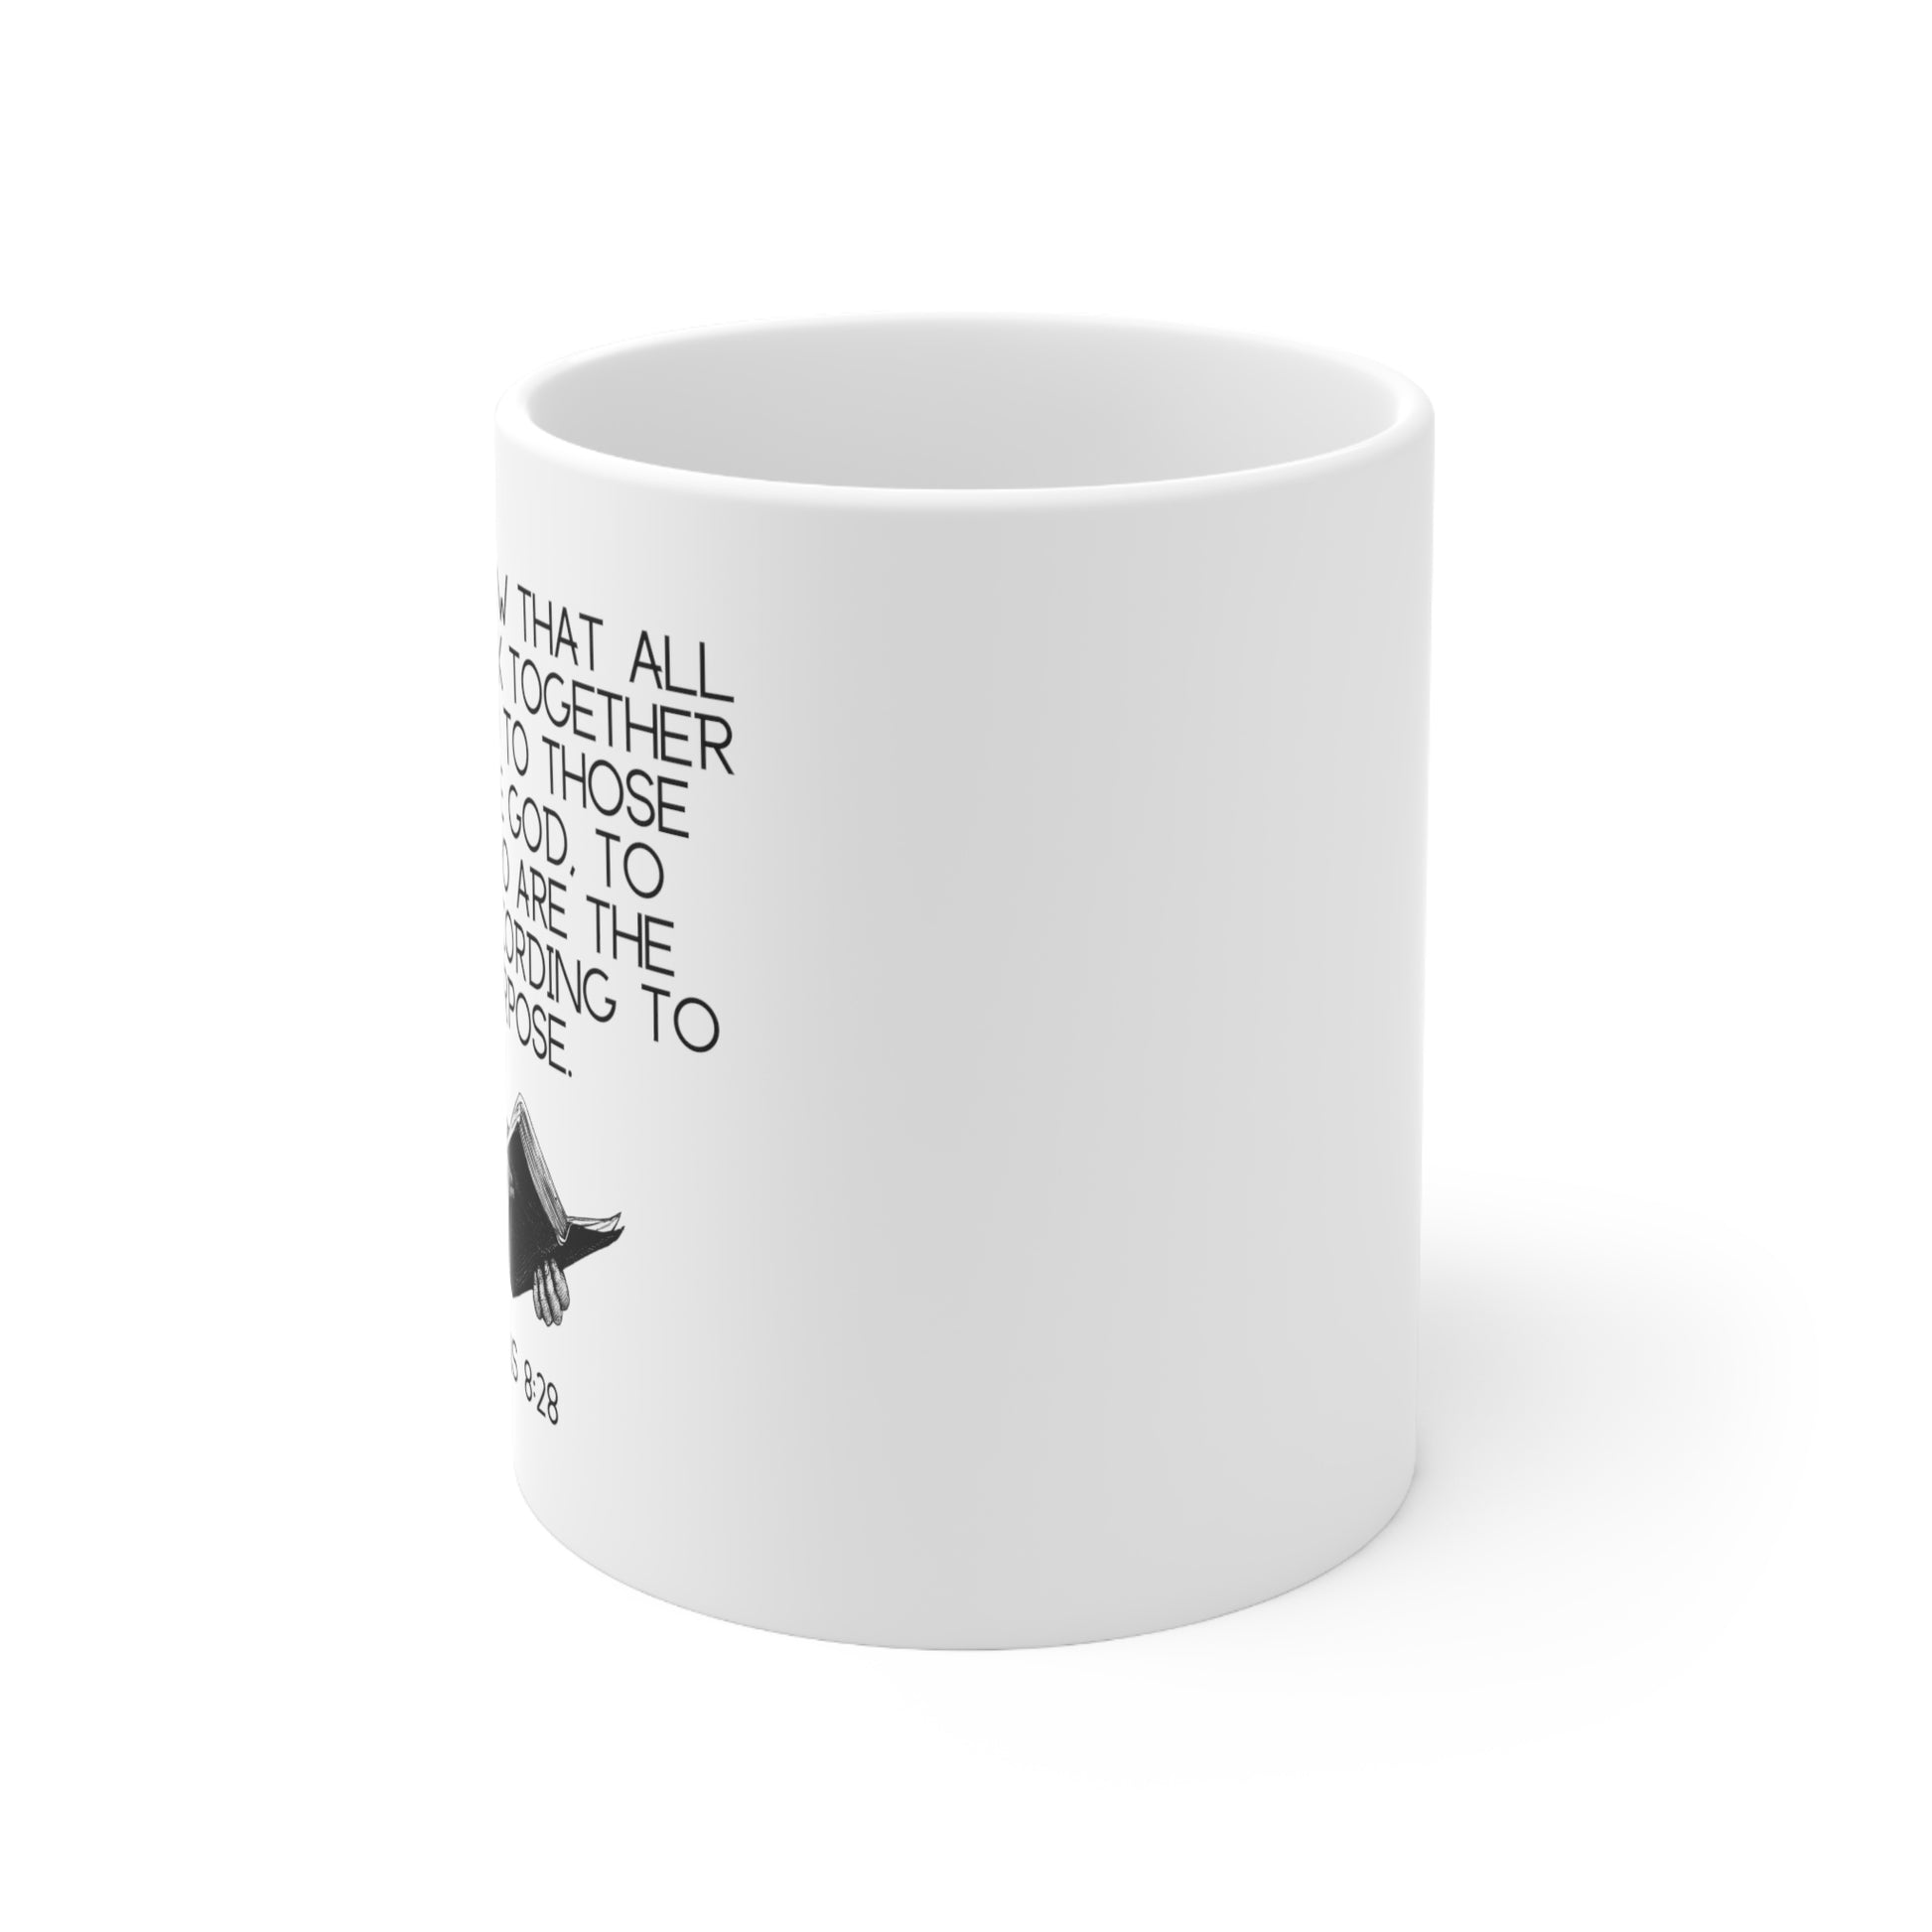 "Romans 8:28" Coffee Mug - Weave Got Gifts - Unique Gifts You Won’t Find Anywhere Else!